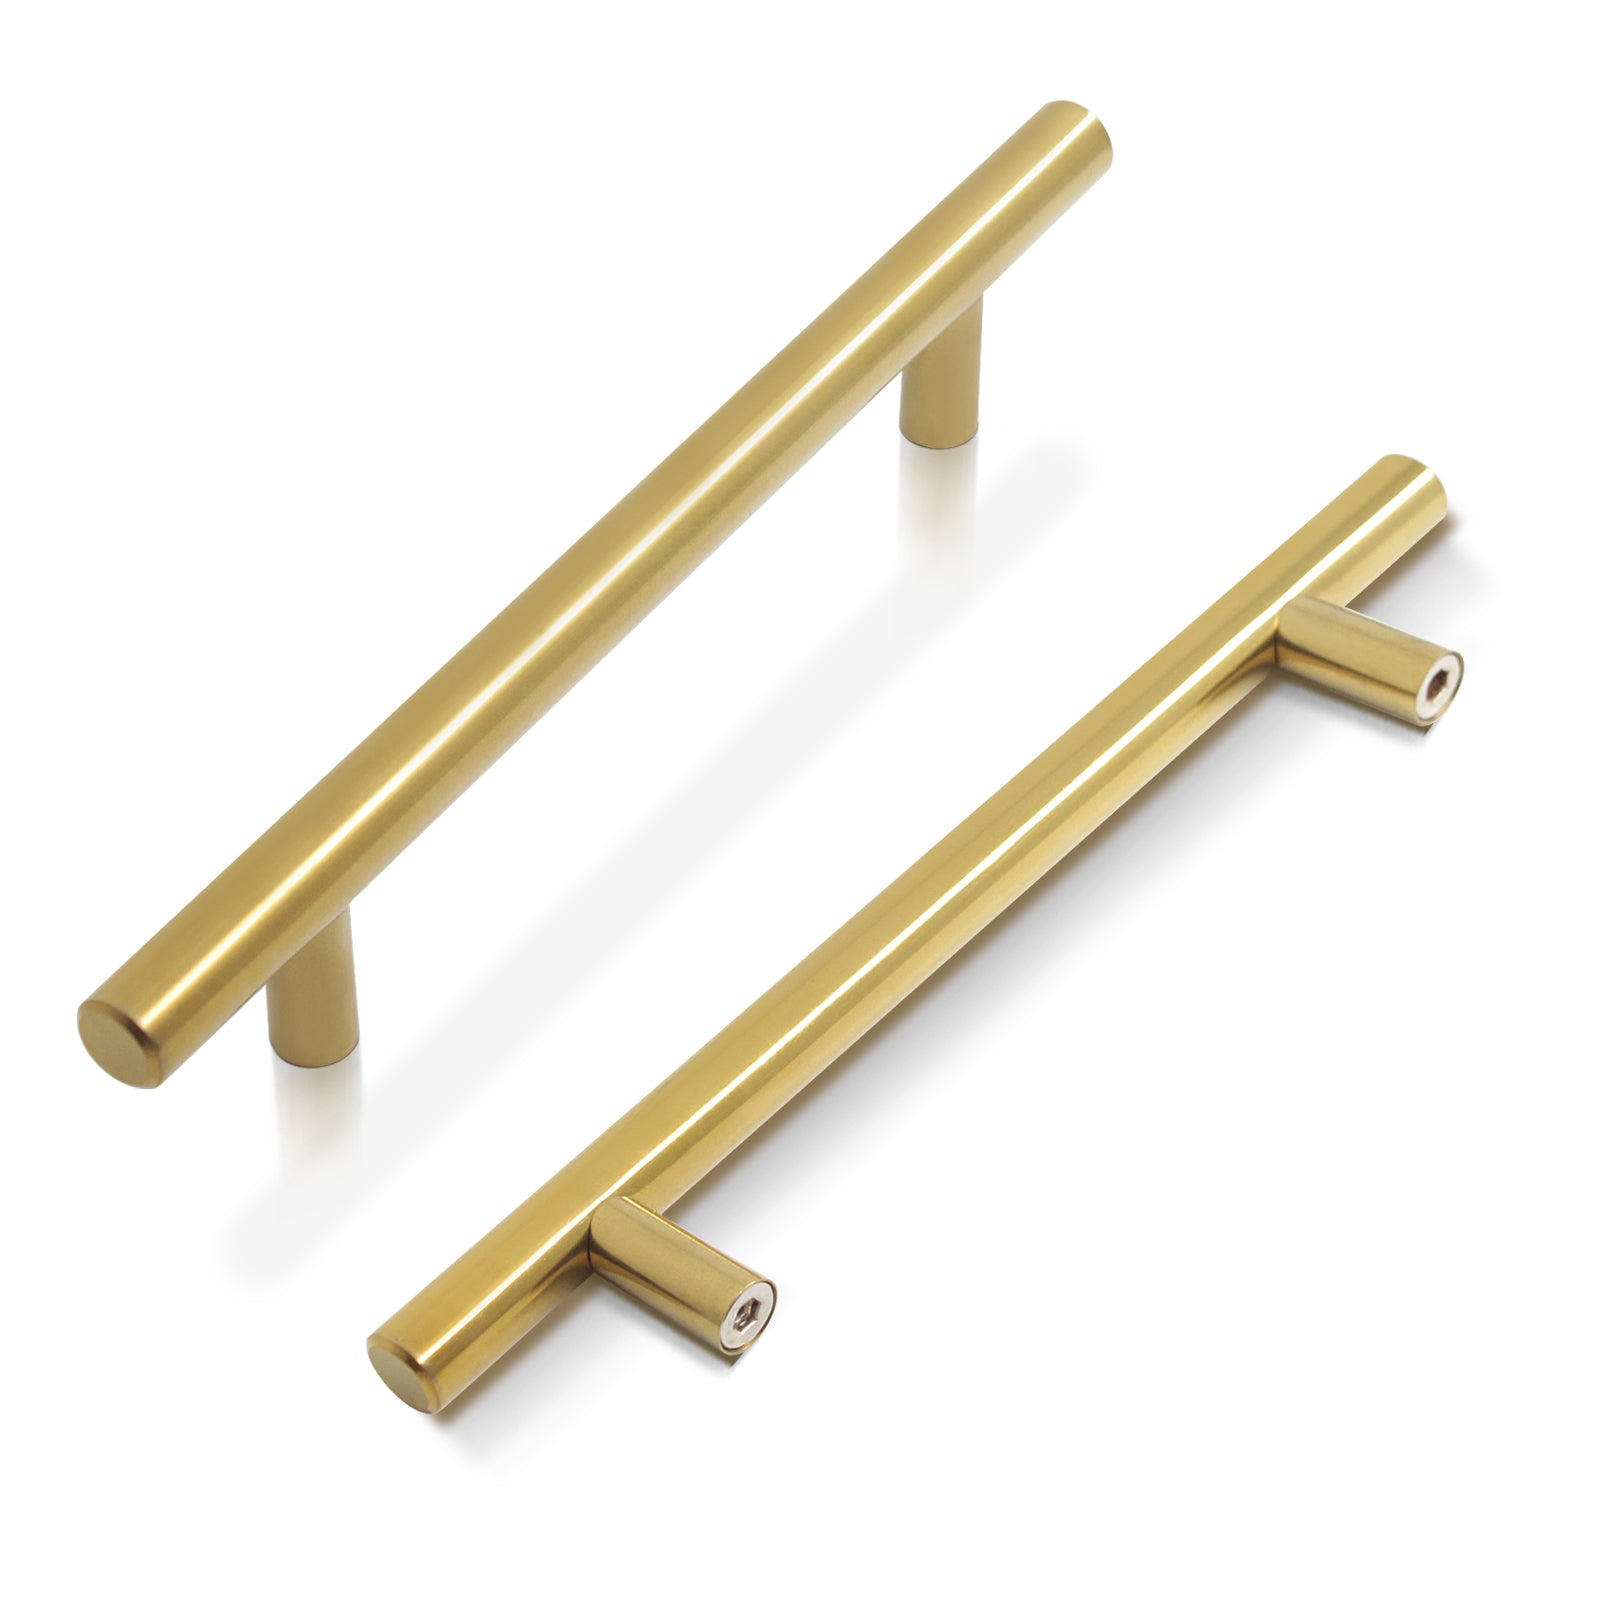 Stainless Steel T Bar Cabinet Handles Gold Finish, 128mm 5inch Hole Centers